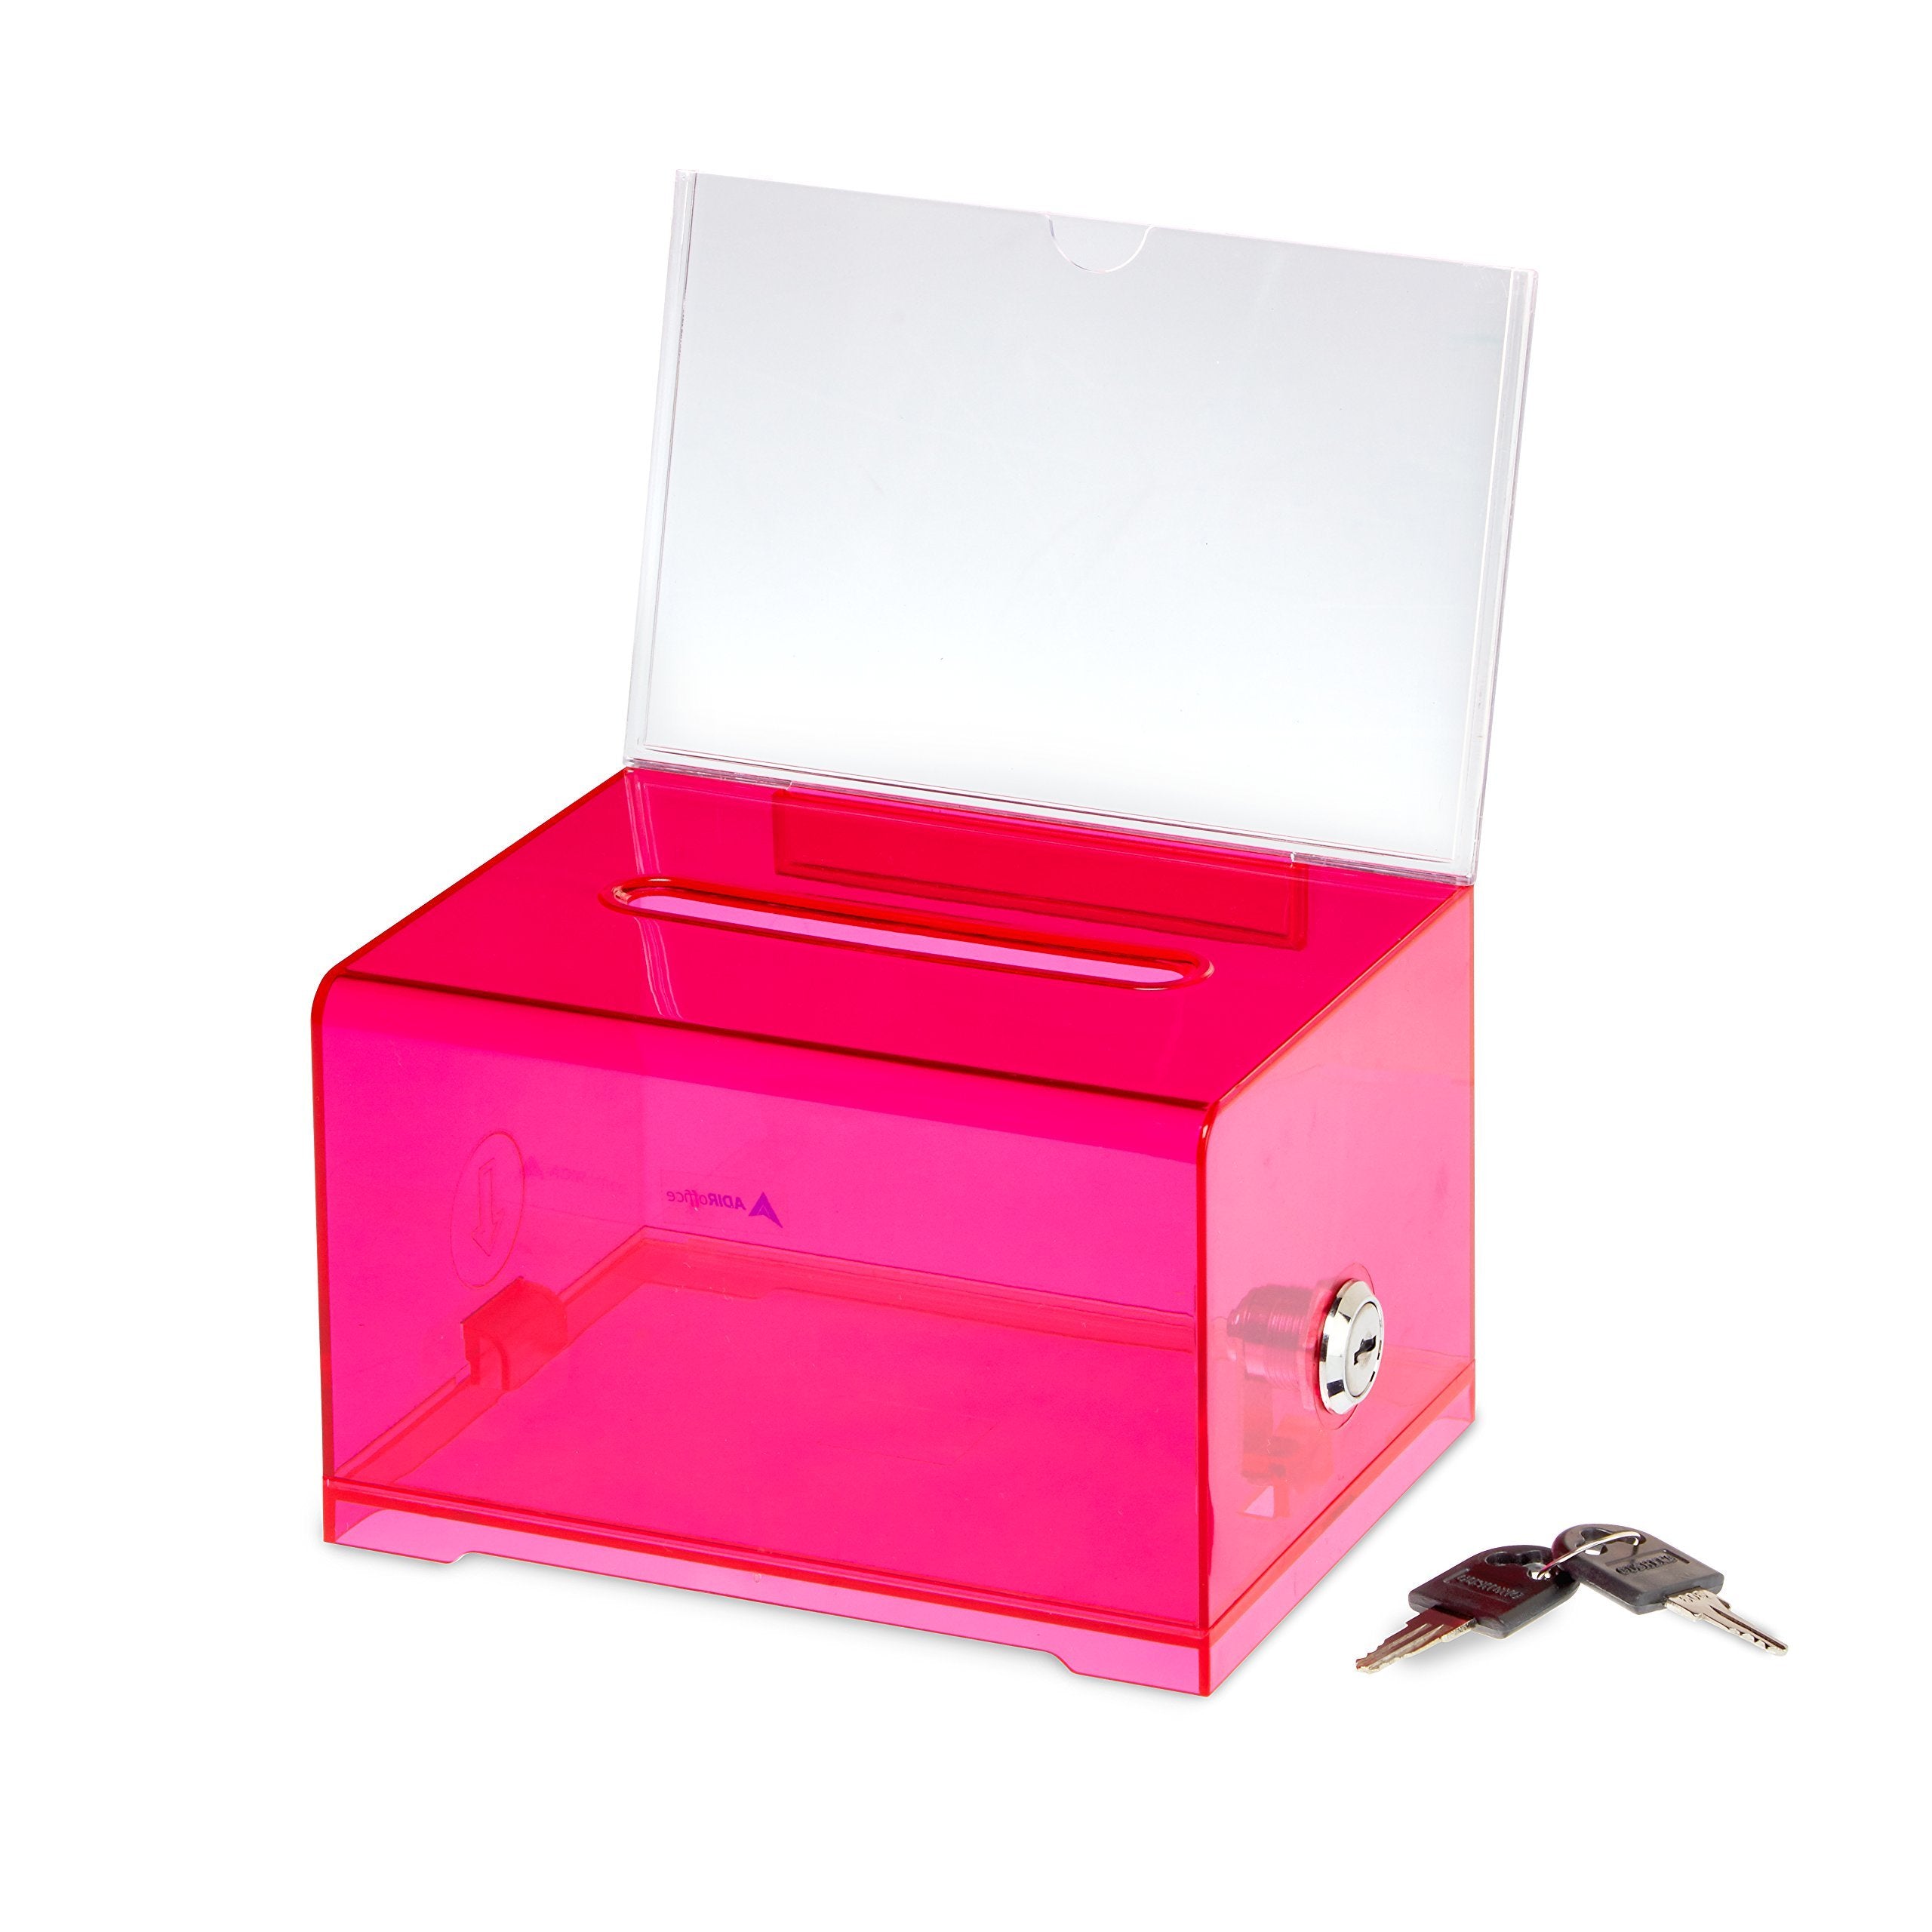 Adir Acrylic Donation Ballot Box with Lock - Secure and Safe Clear Slotted Suggestion Box - Storage Lock Deposit Box with Keys for Cards, Votes, Tickets, Feedback and Money (6.25" x 4.5" x 4")